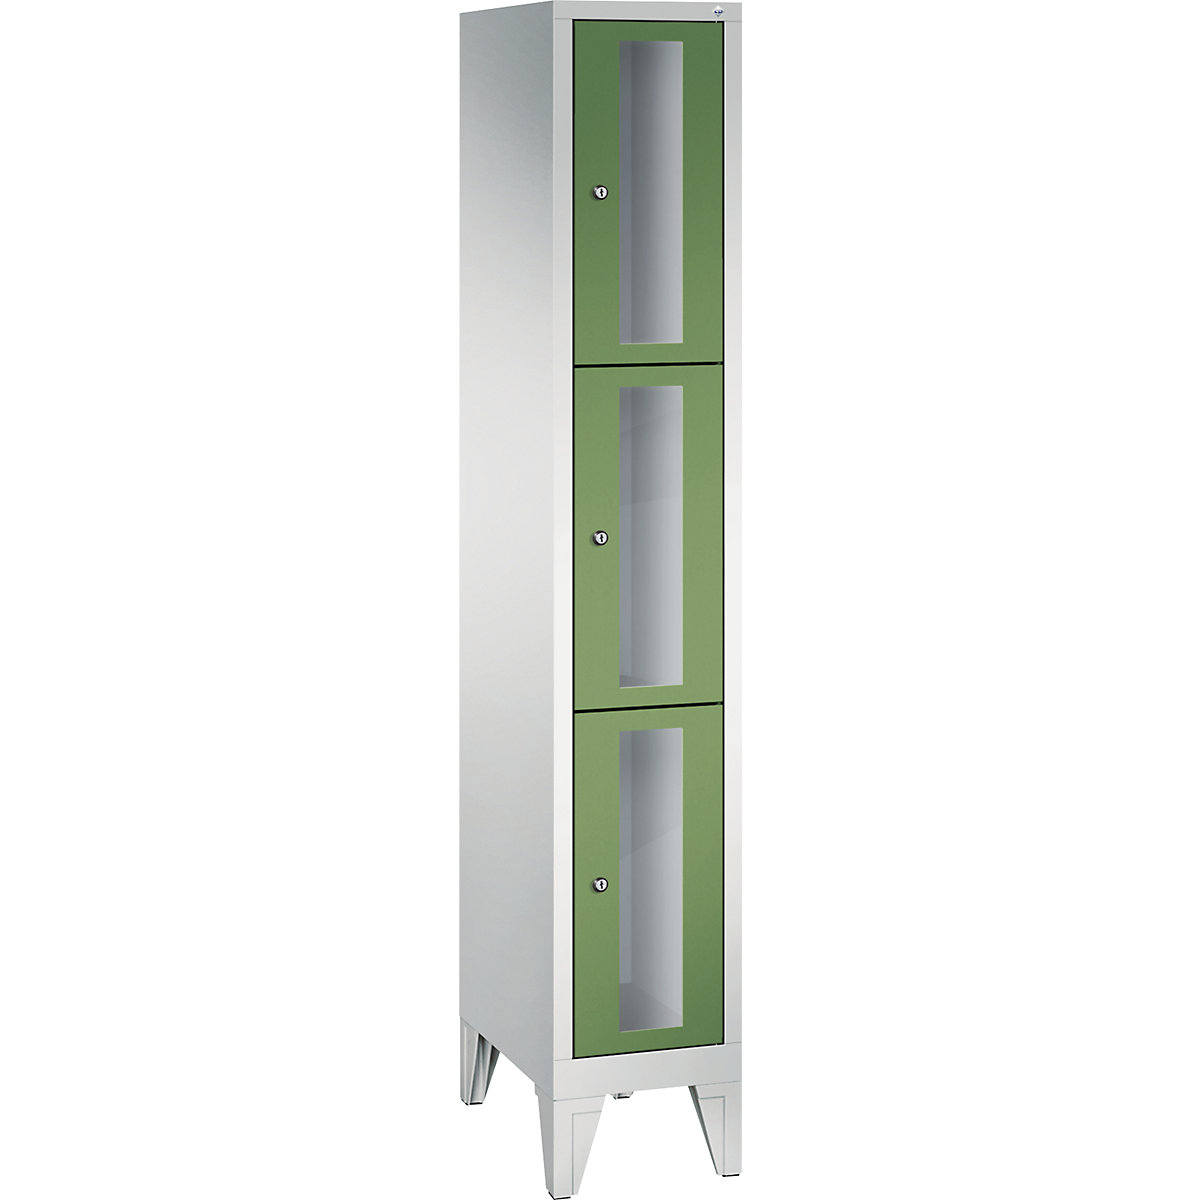 CLASSIC locker unit, compartment height 510 mm, with feet – C+P, 3 compartments, width 320 mm, reseda green door-4